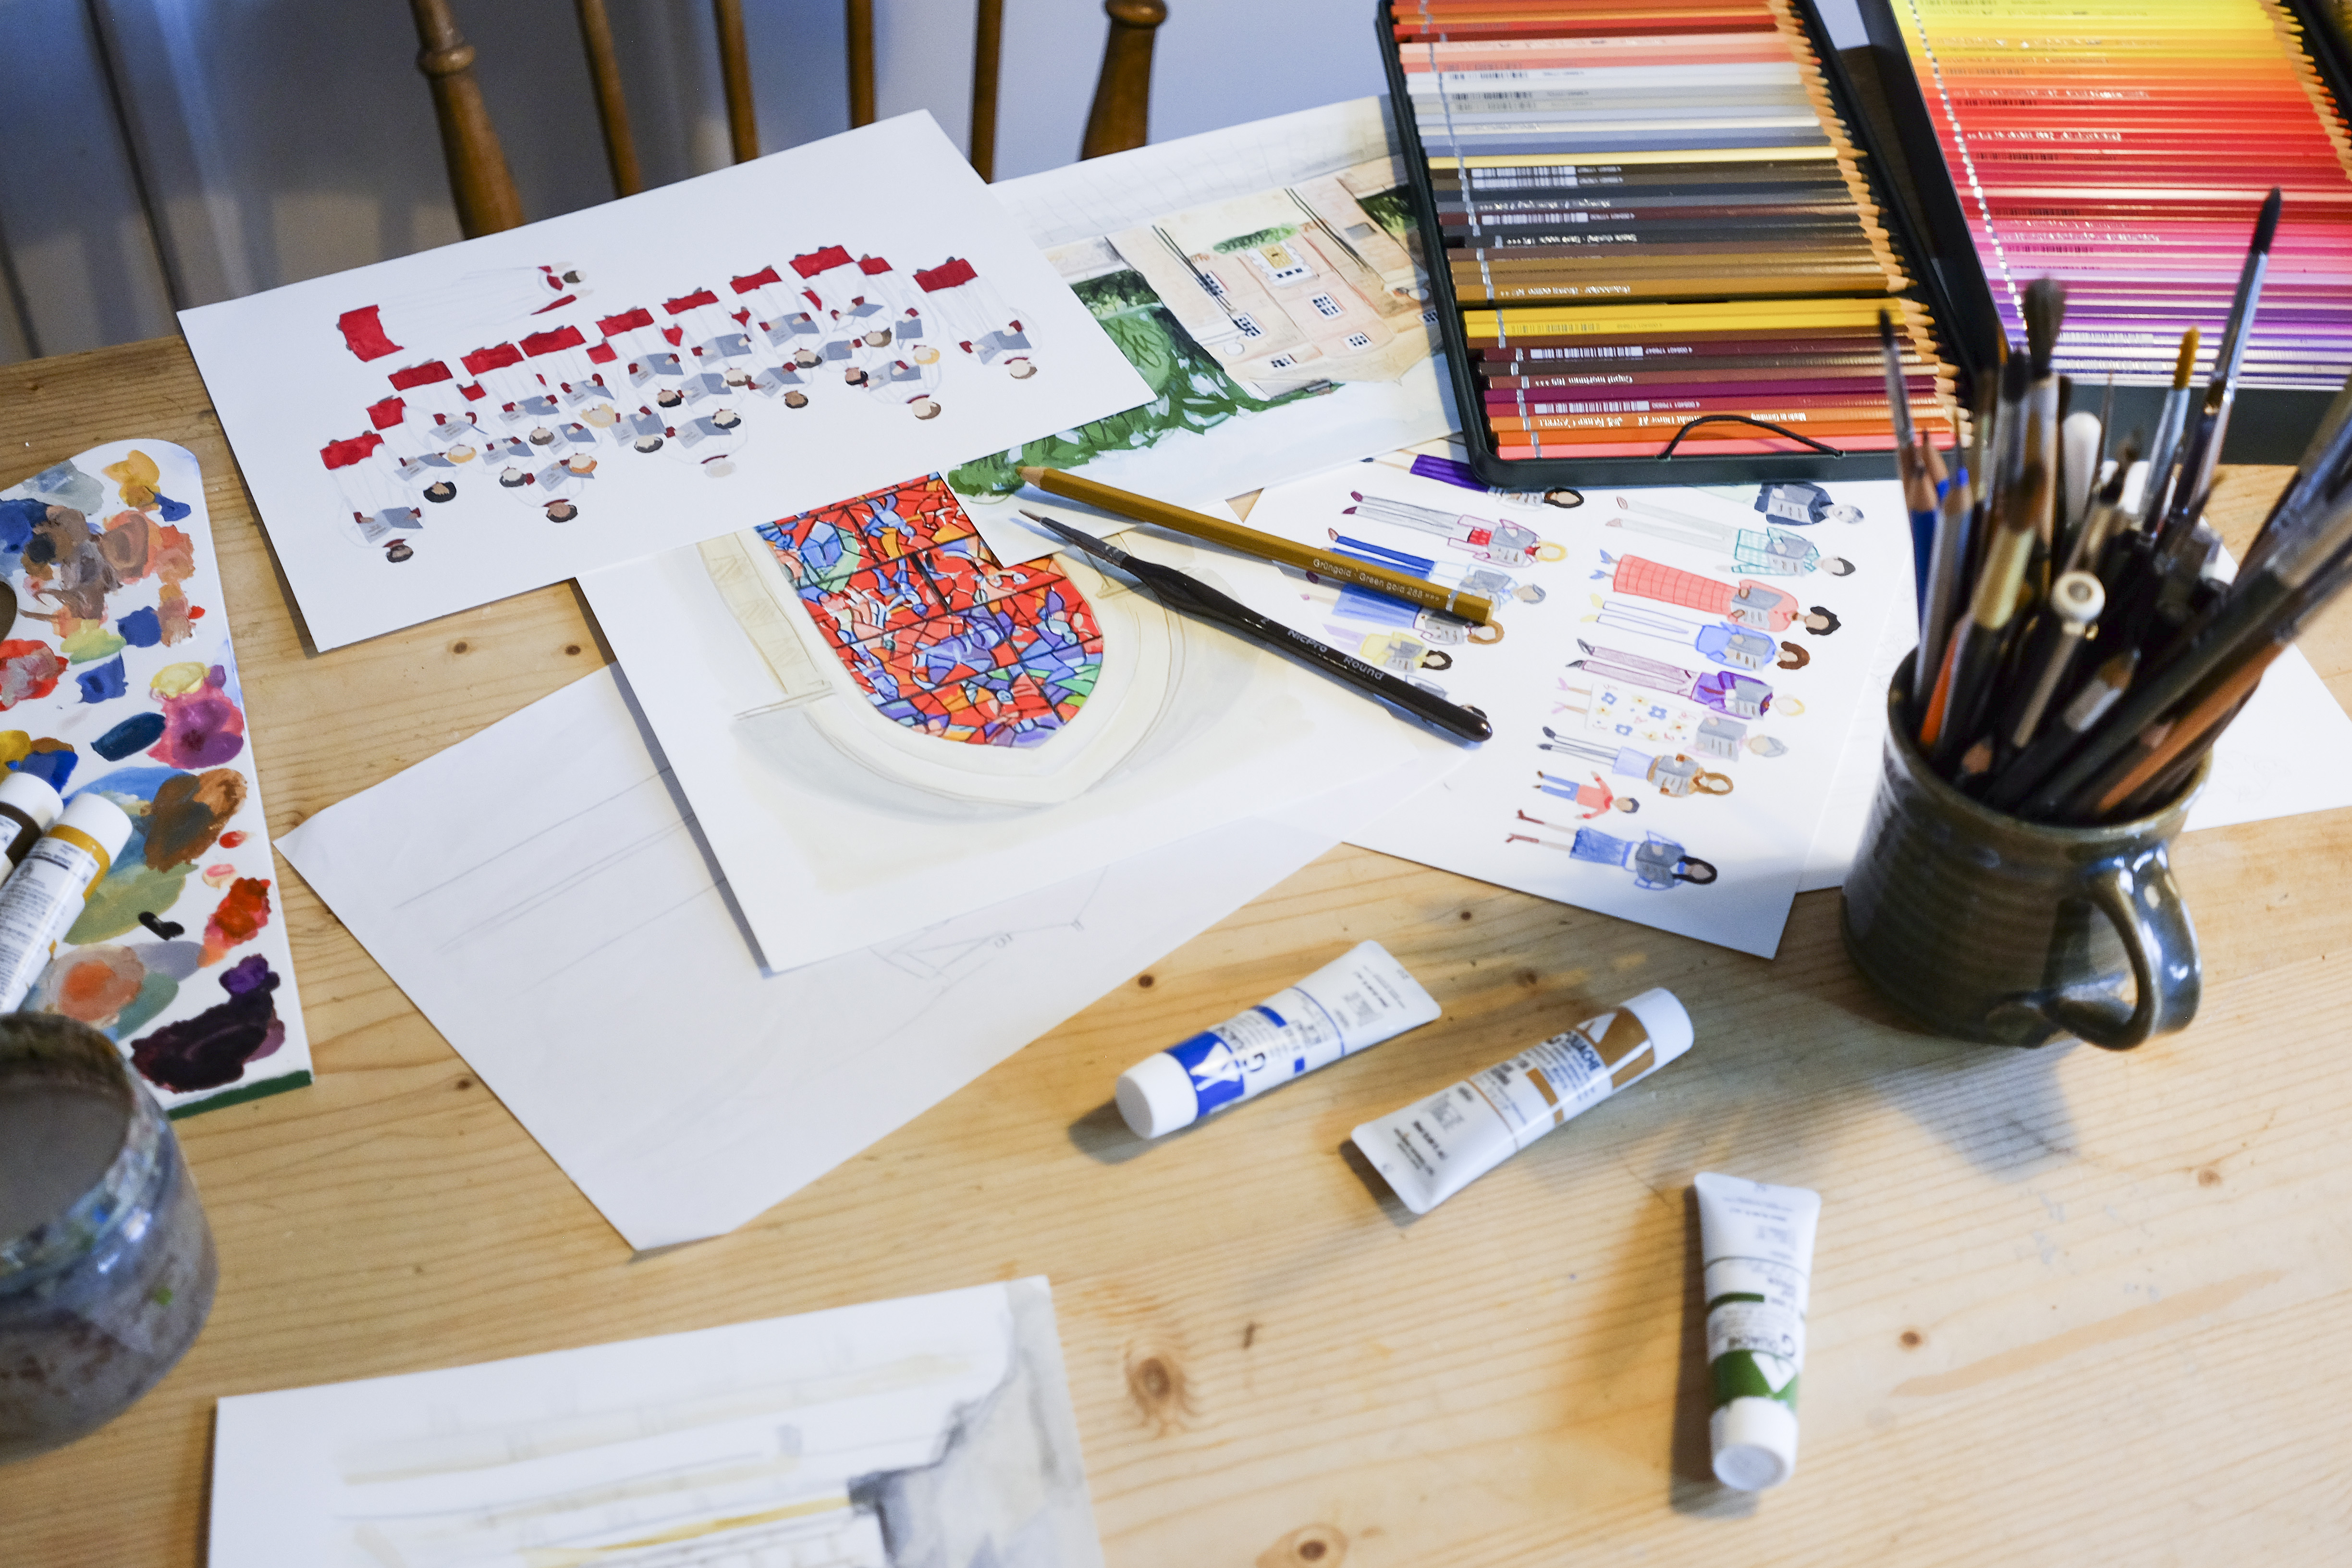 A table with paints, paintbrushes, pencils and paper with illustrations from Bertie the Cathedral Cat's story